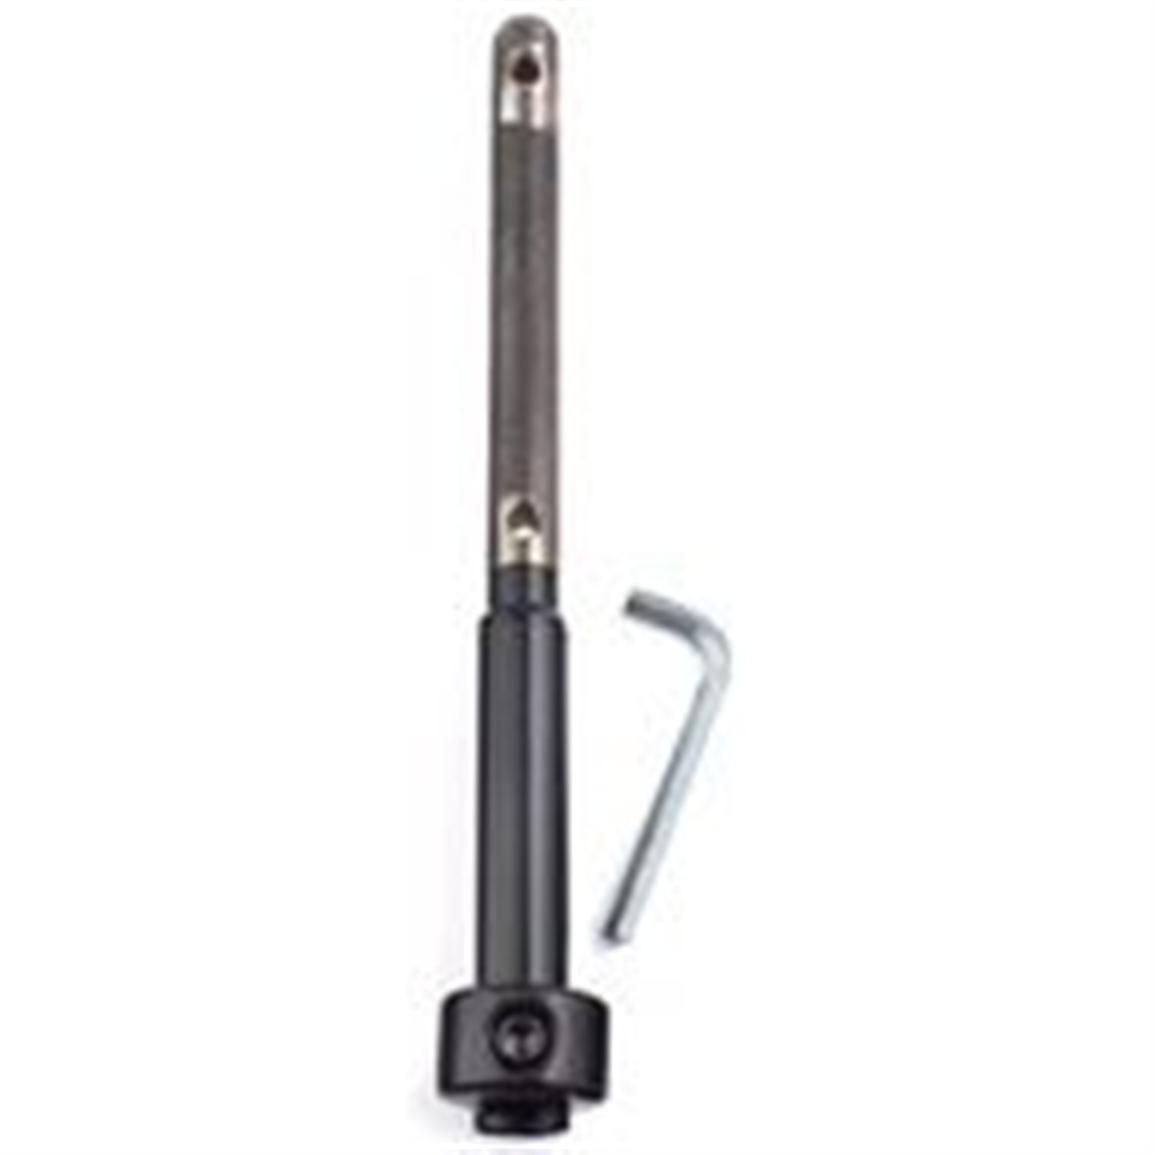 JIFFY ICE AUGER 2845 6" ICE FISHING 12" POWER AUGER EXTENSION